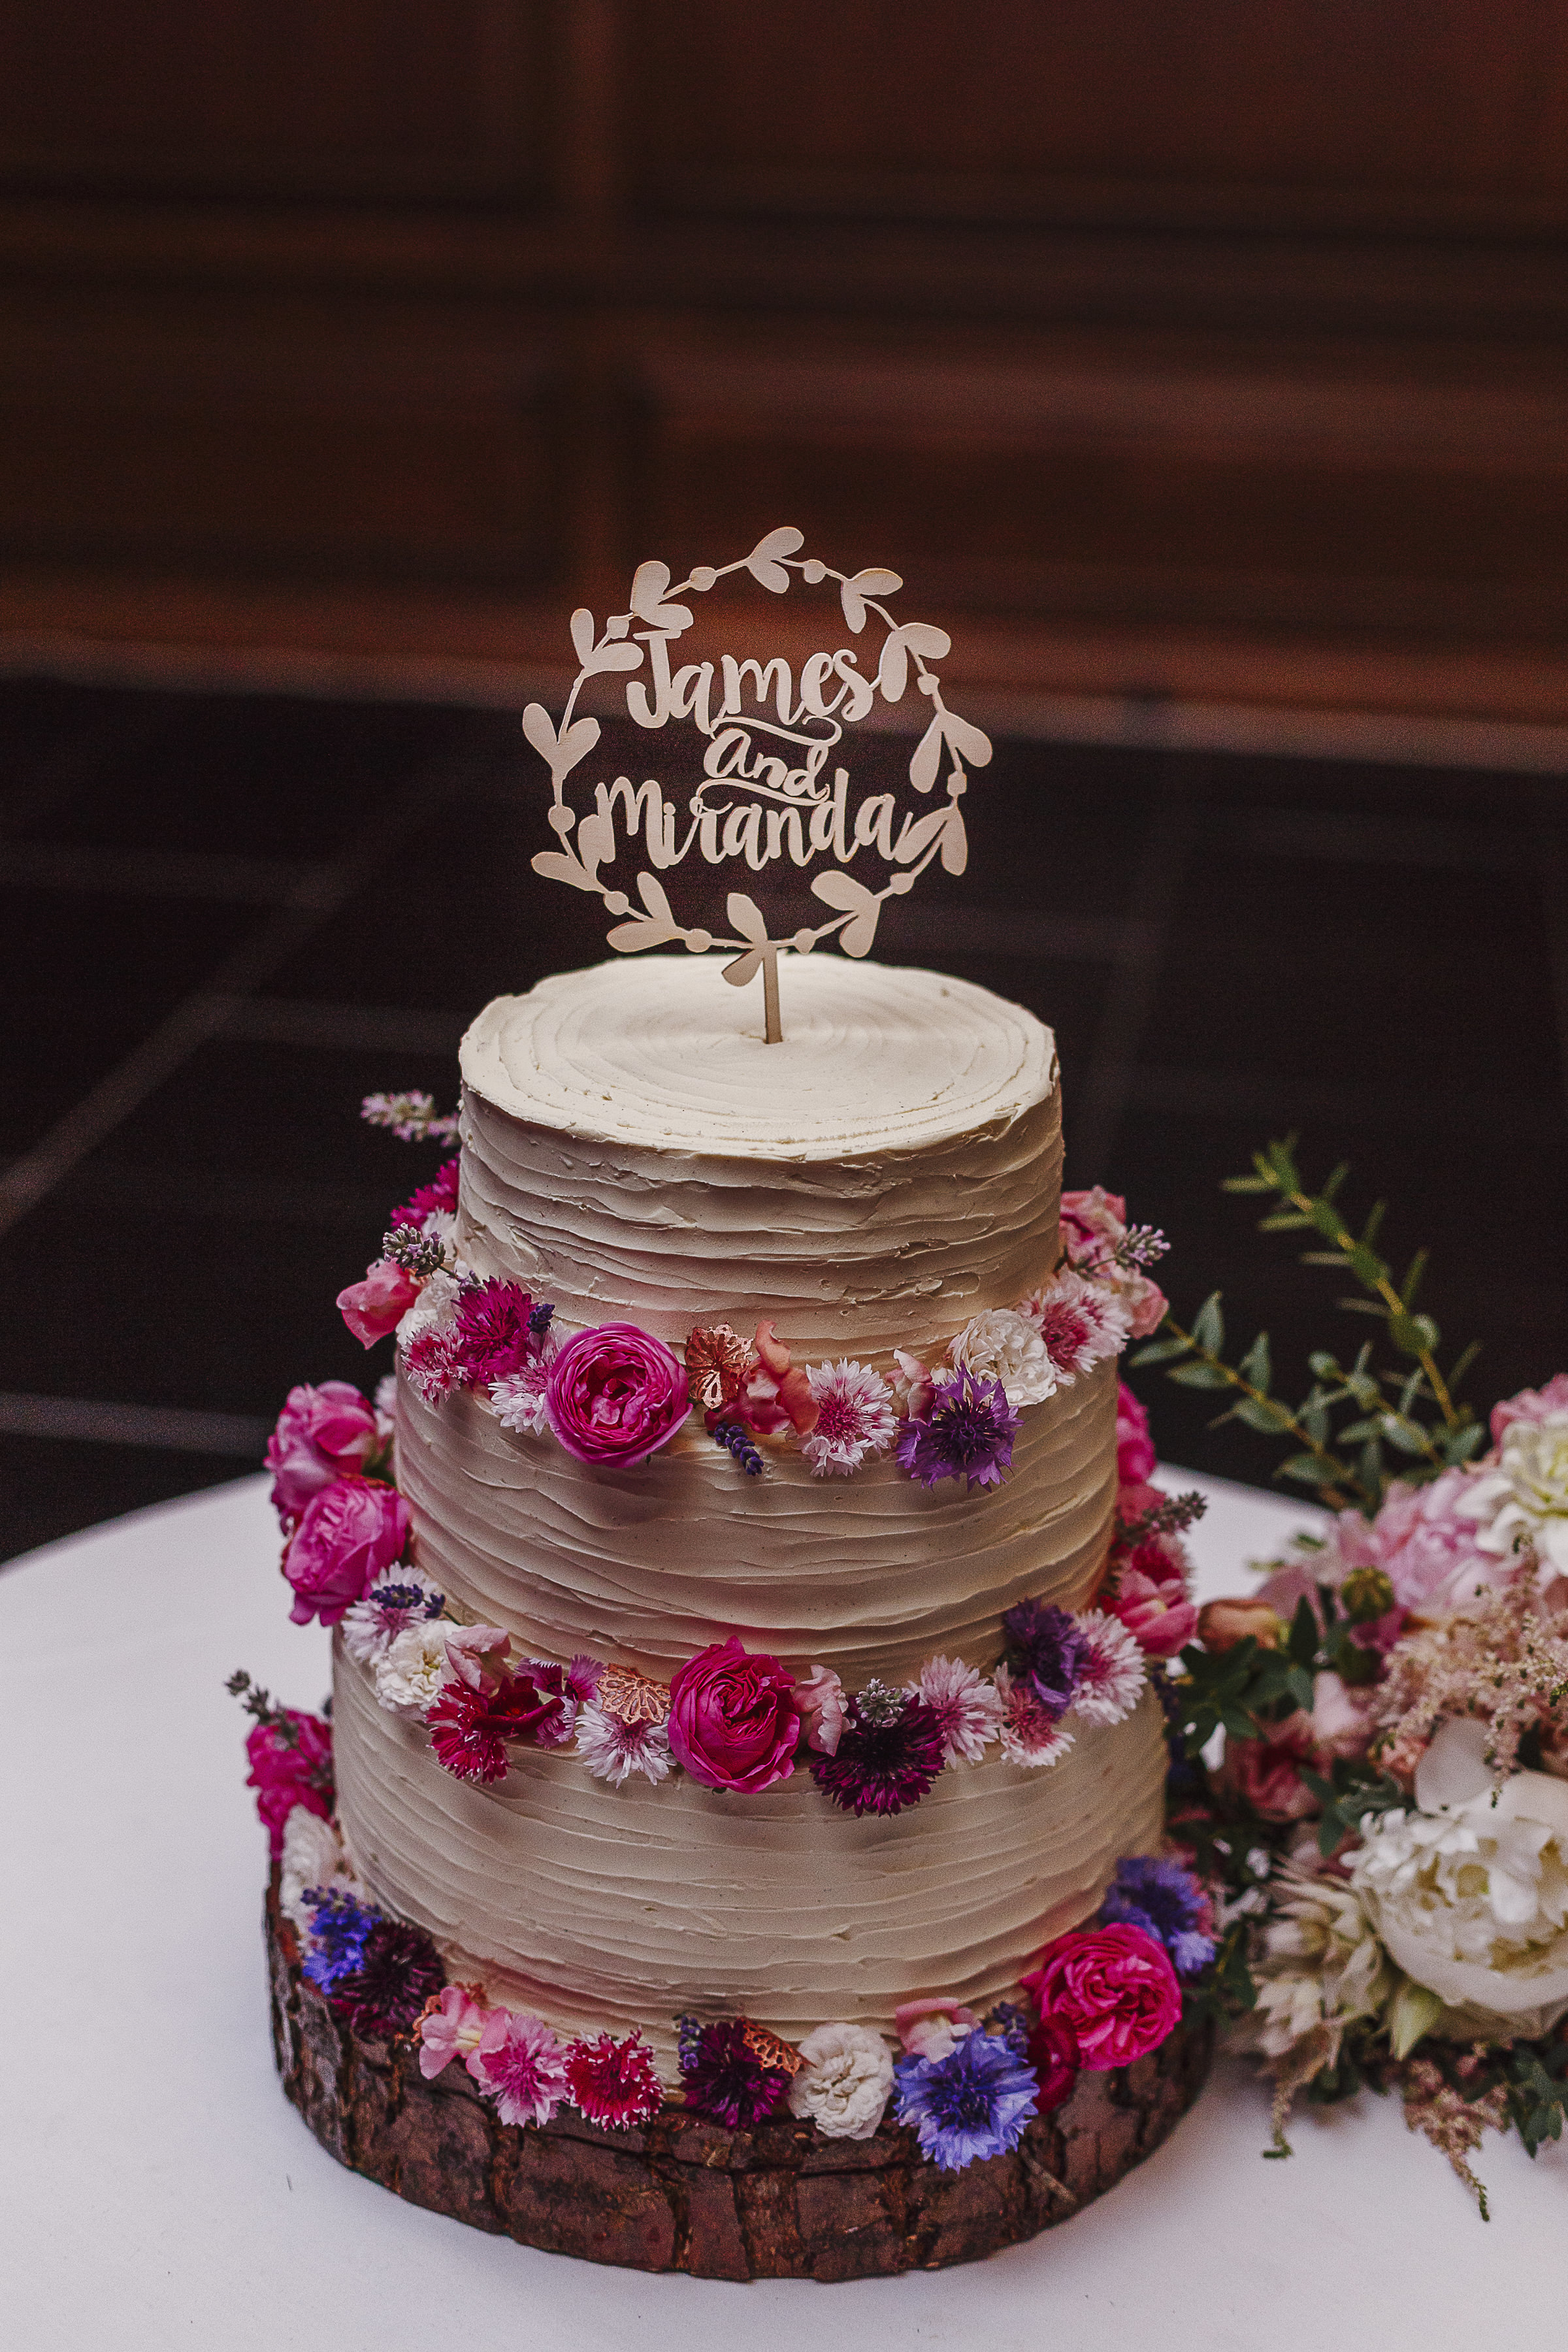 Organic Devon Meadow flowers bring a real English Garden touch to any wedding cake